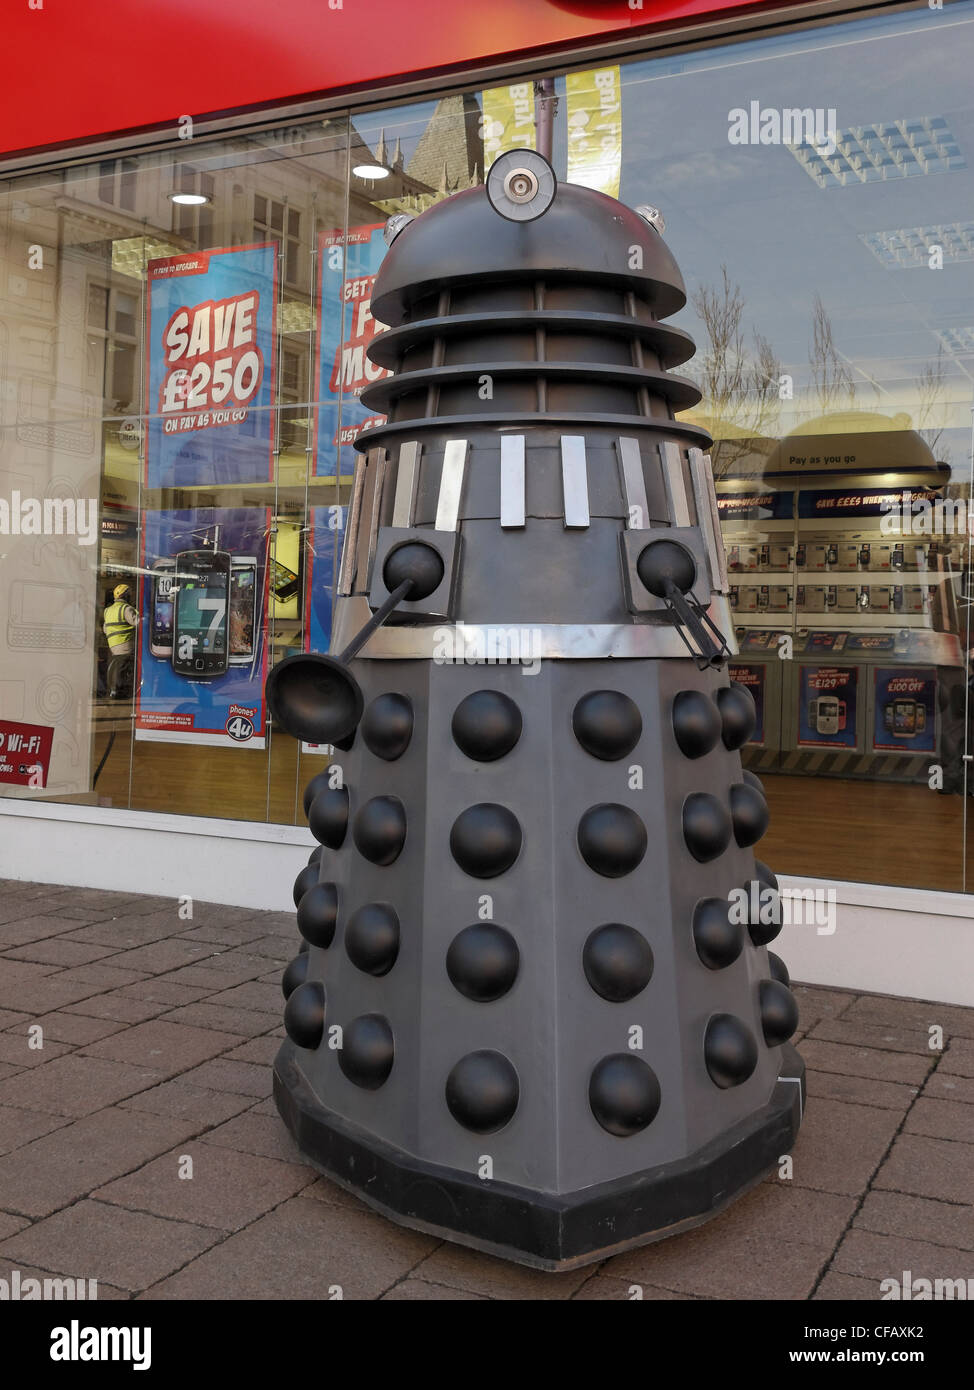 A Dalek on display in Loughborough, Leicestershire, England. Stock Photo